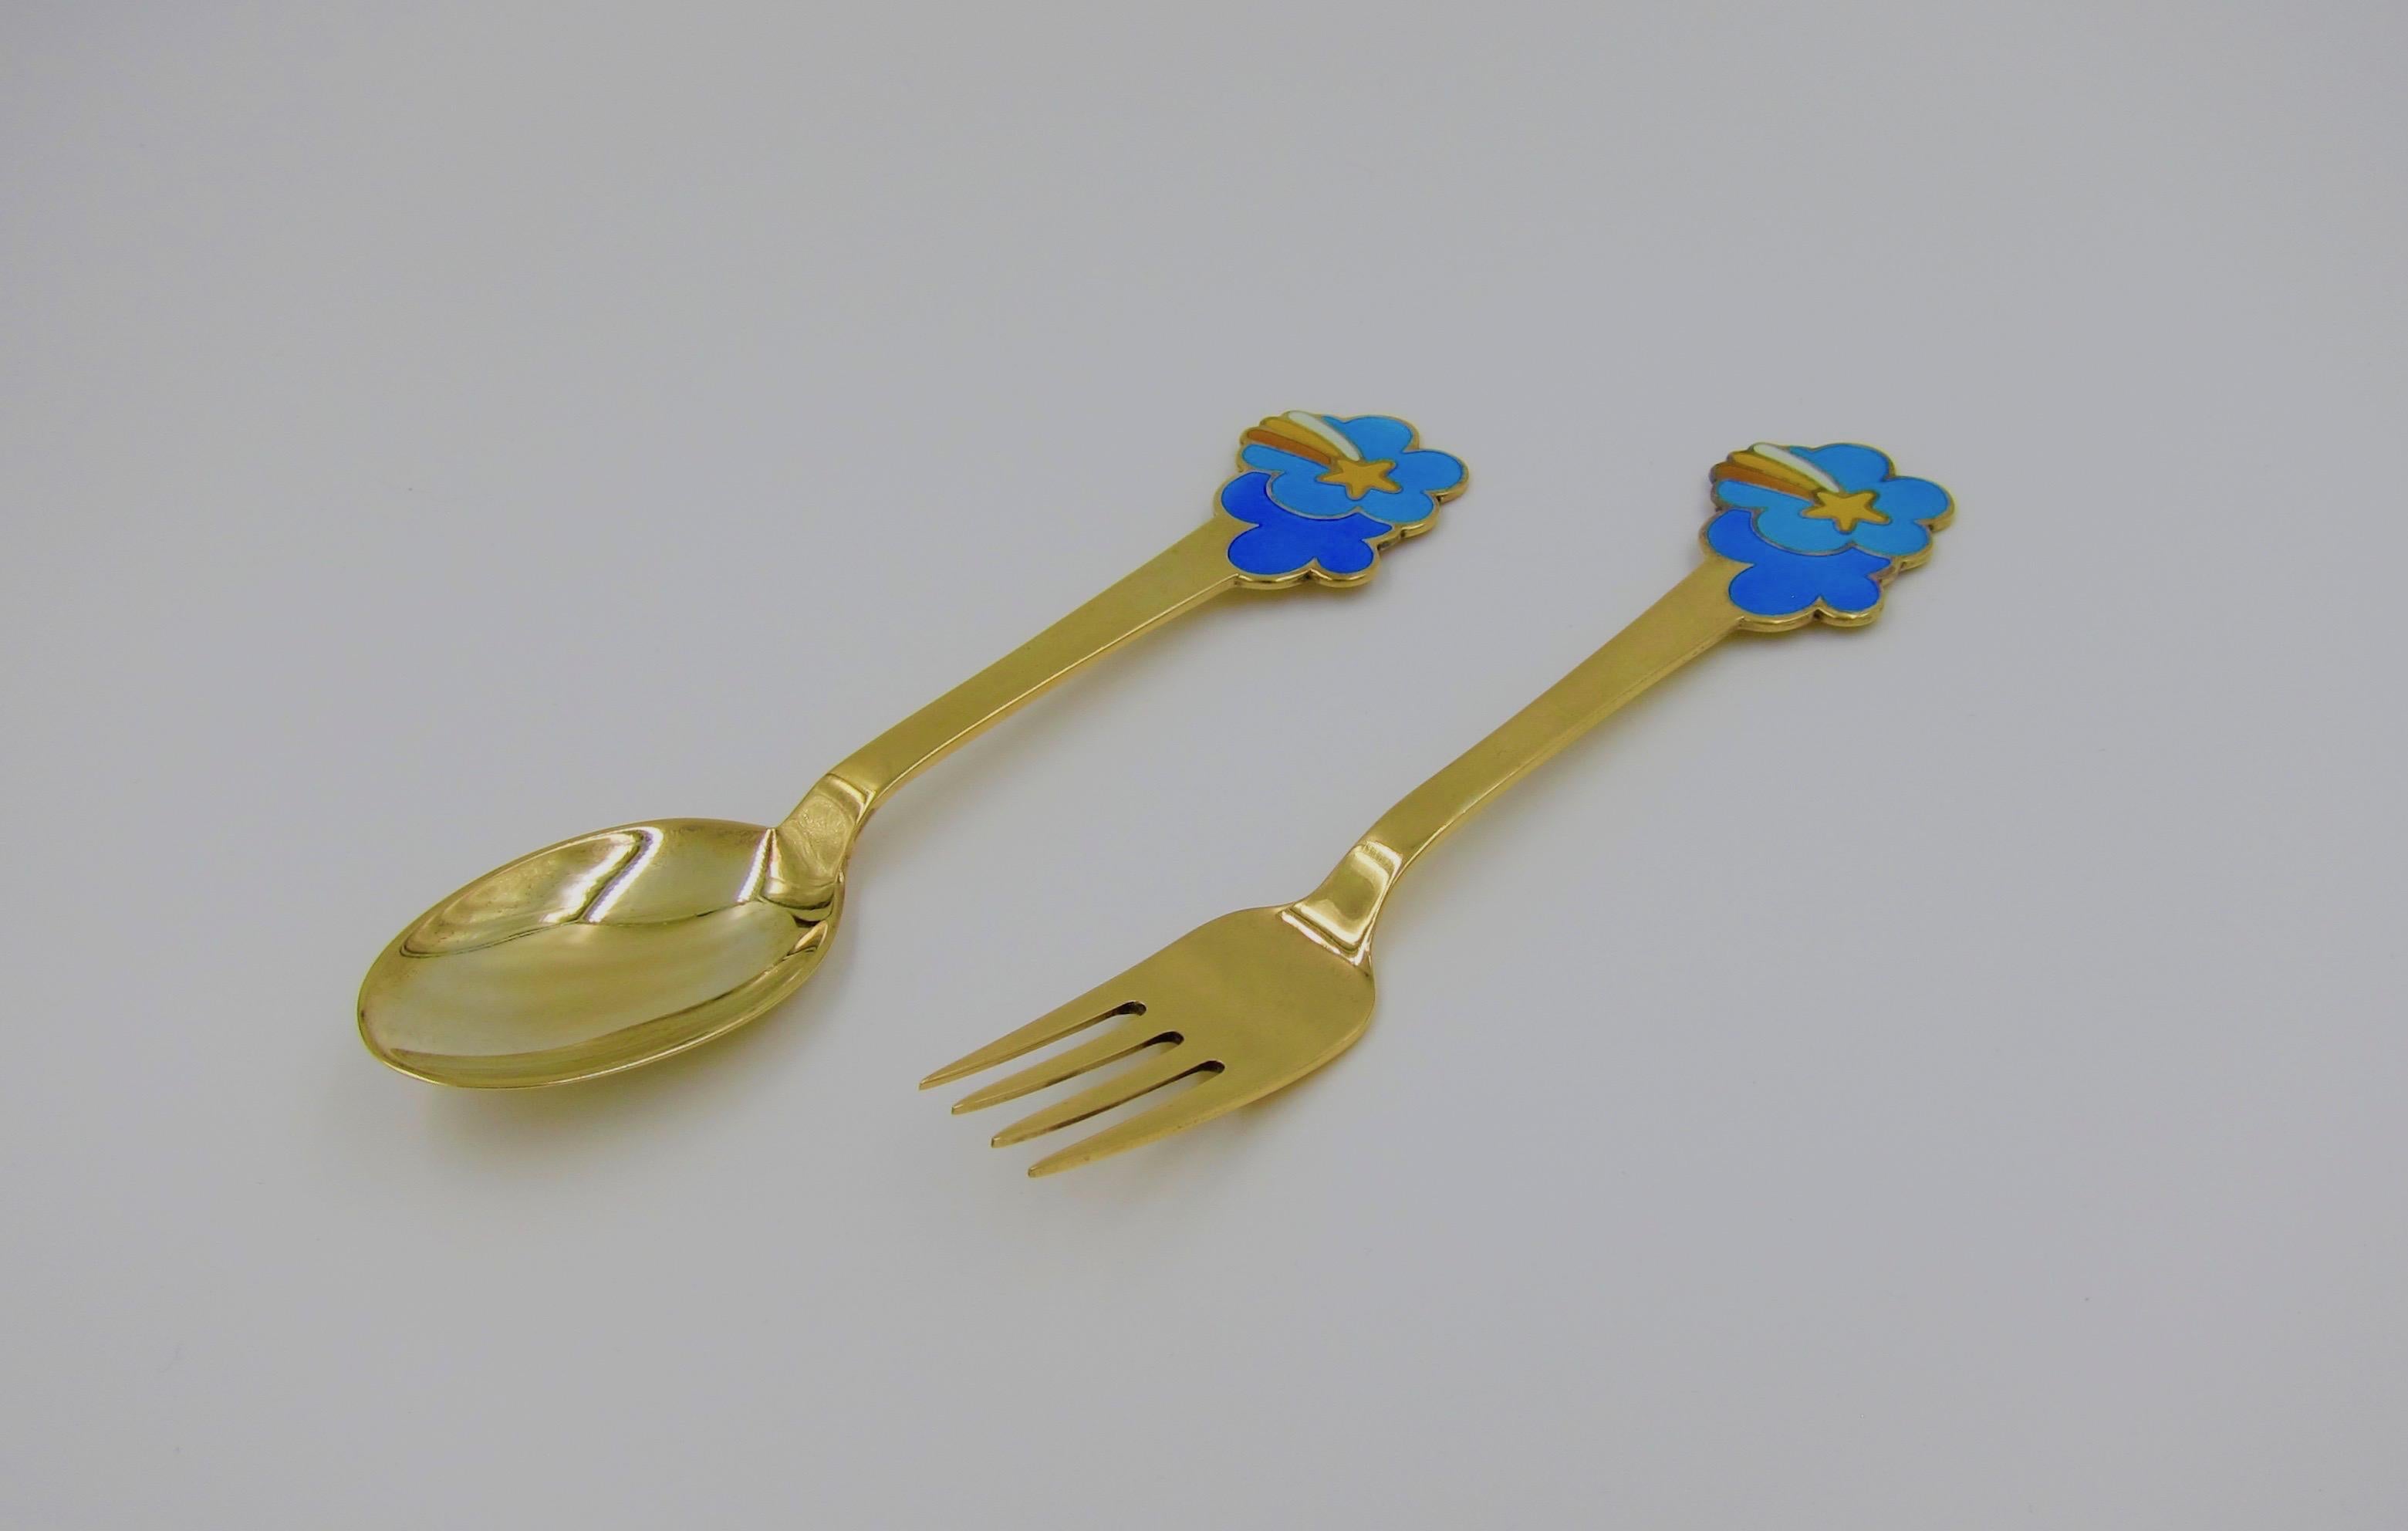 A Danish gilded sterling silver and enamel Christmas fork and spoon set from Anton Michelsen of Copenhagen, Denmark. Per Arnoldi (b. 1941) created this 